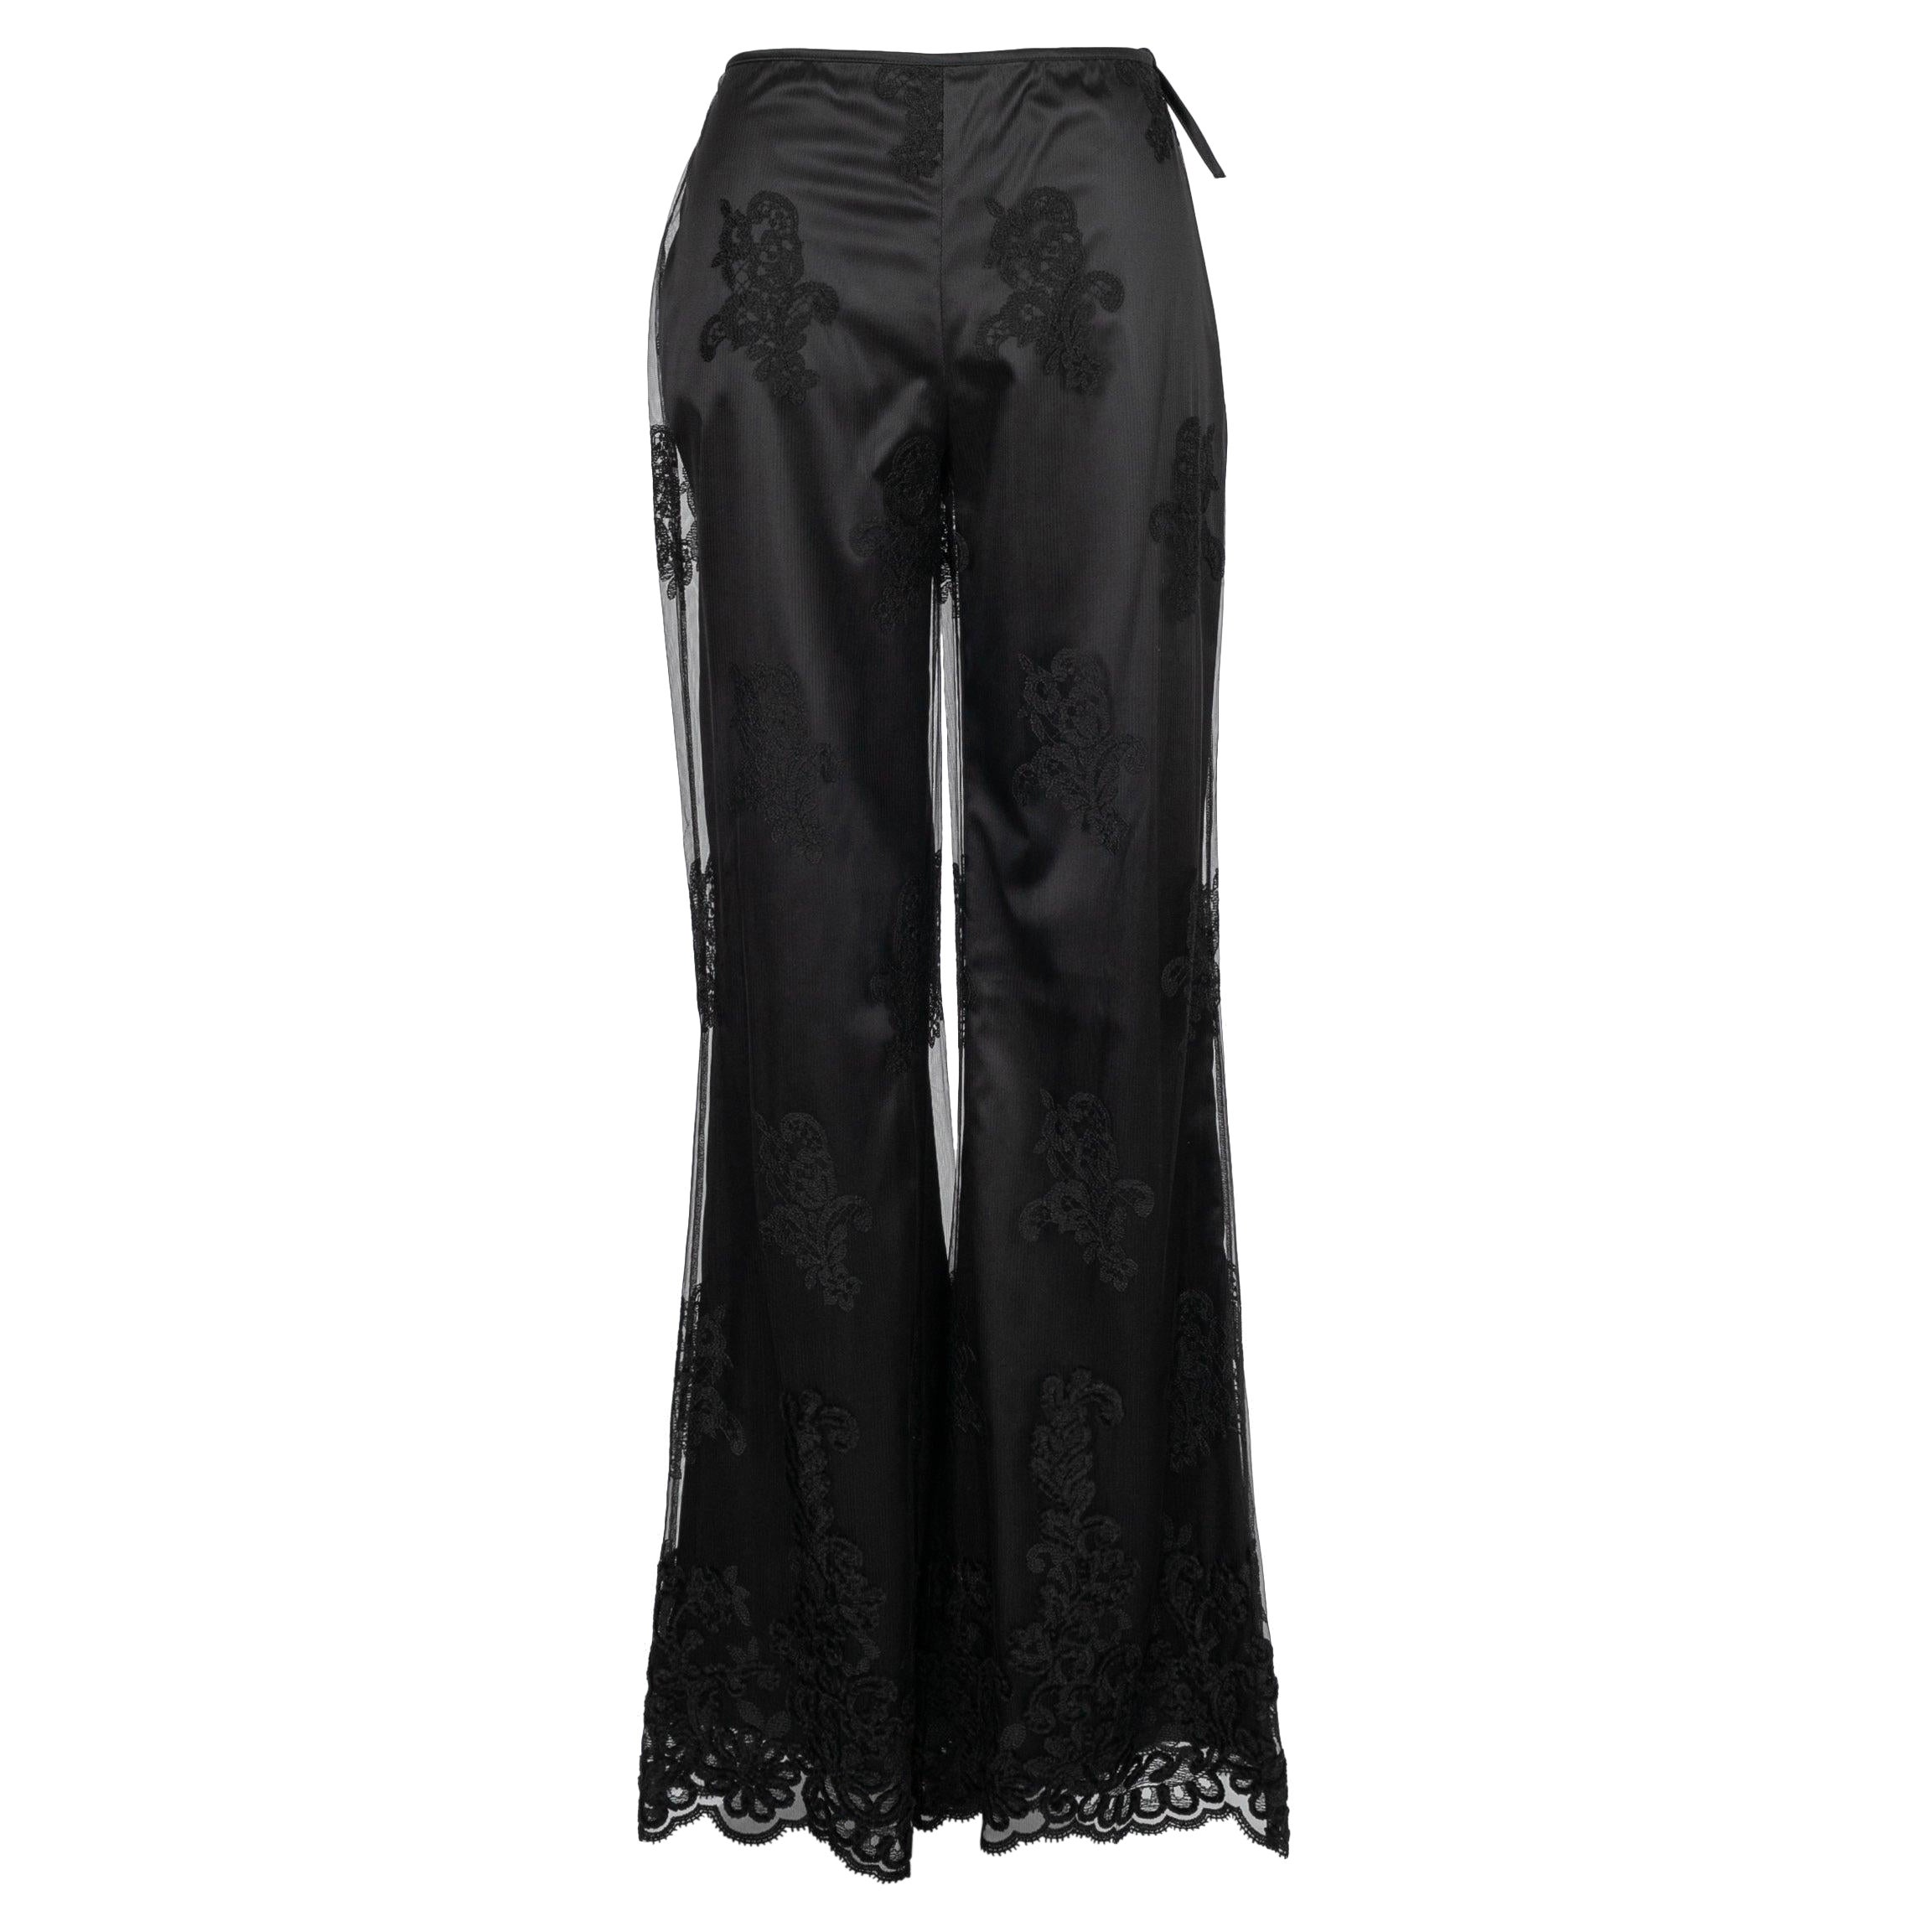 La Perla Black Satin Pants Enlivened with a Tulle Embroidered with Patterns For Sale